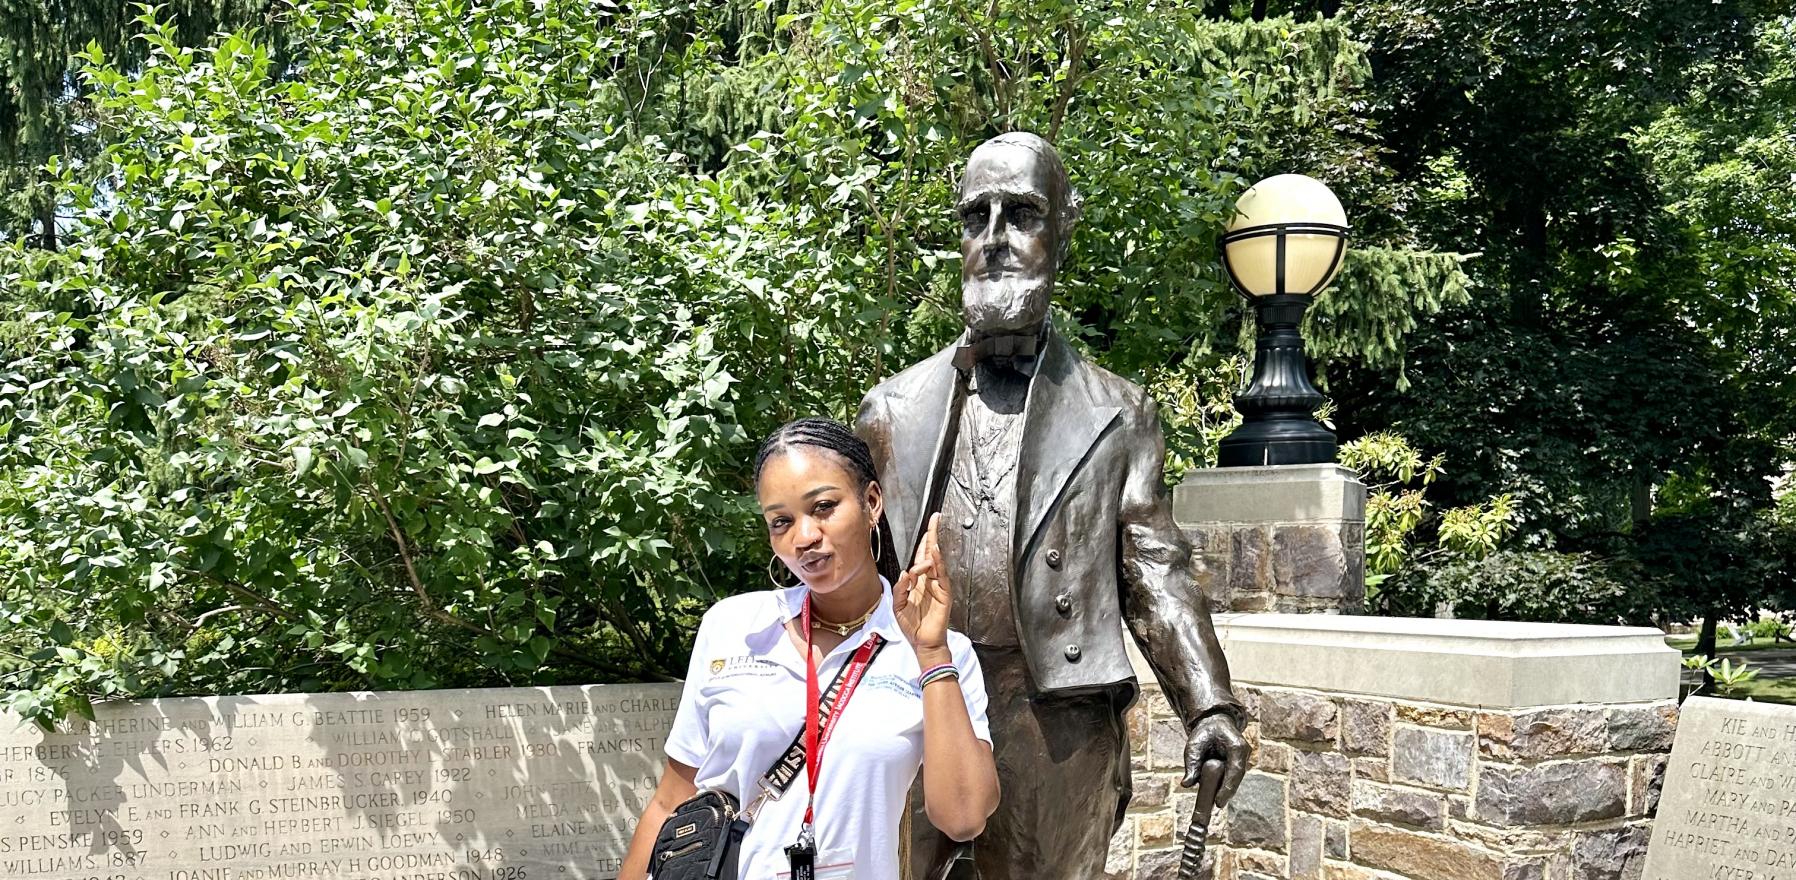 Cham Mendy in front of a statue of Asa Packer at Lehigh University